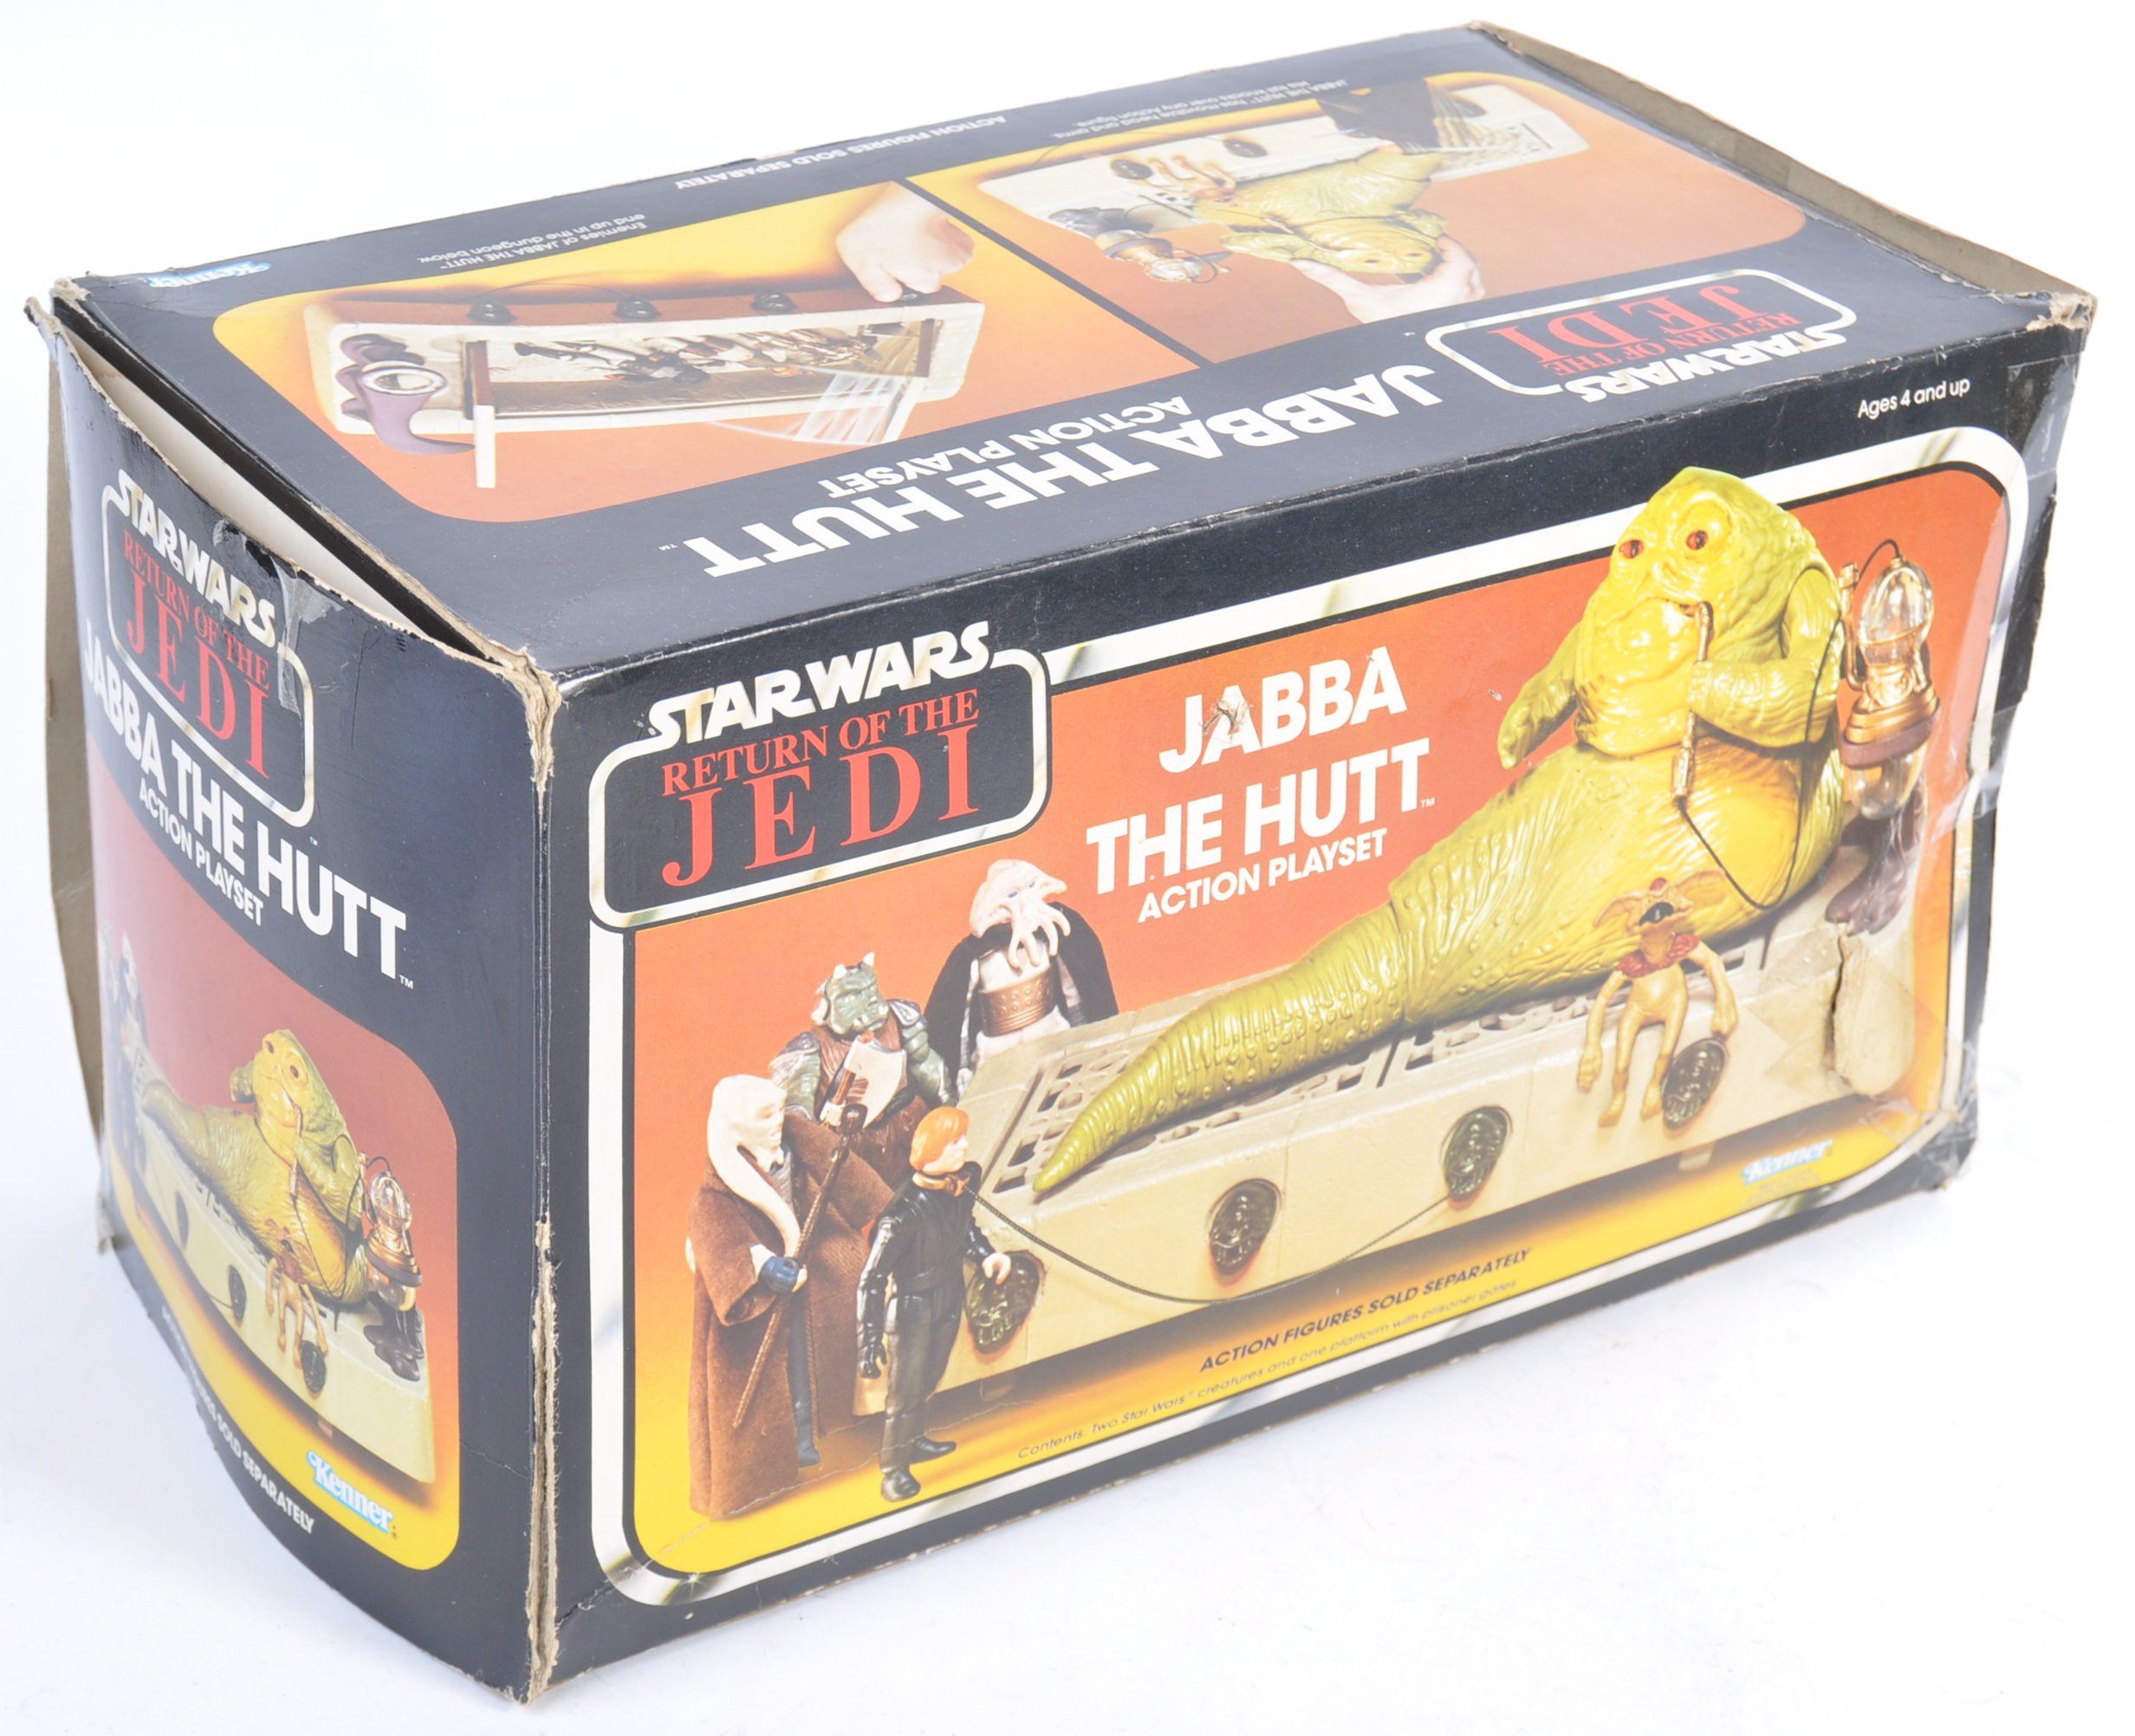 VINTAGE STAR WARS KENNER JABBA THE HUTT ACTION FIGURE PLAYSET - Image 8 of 8